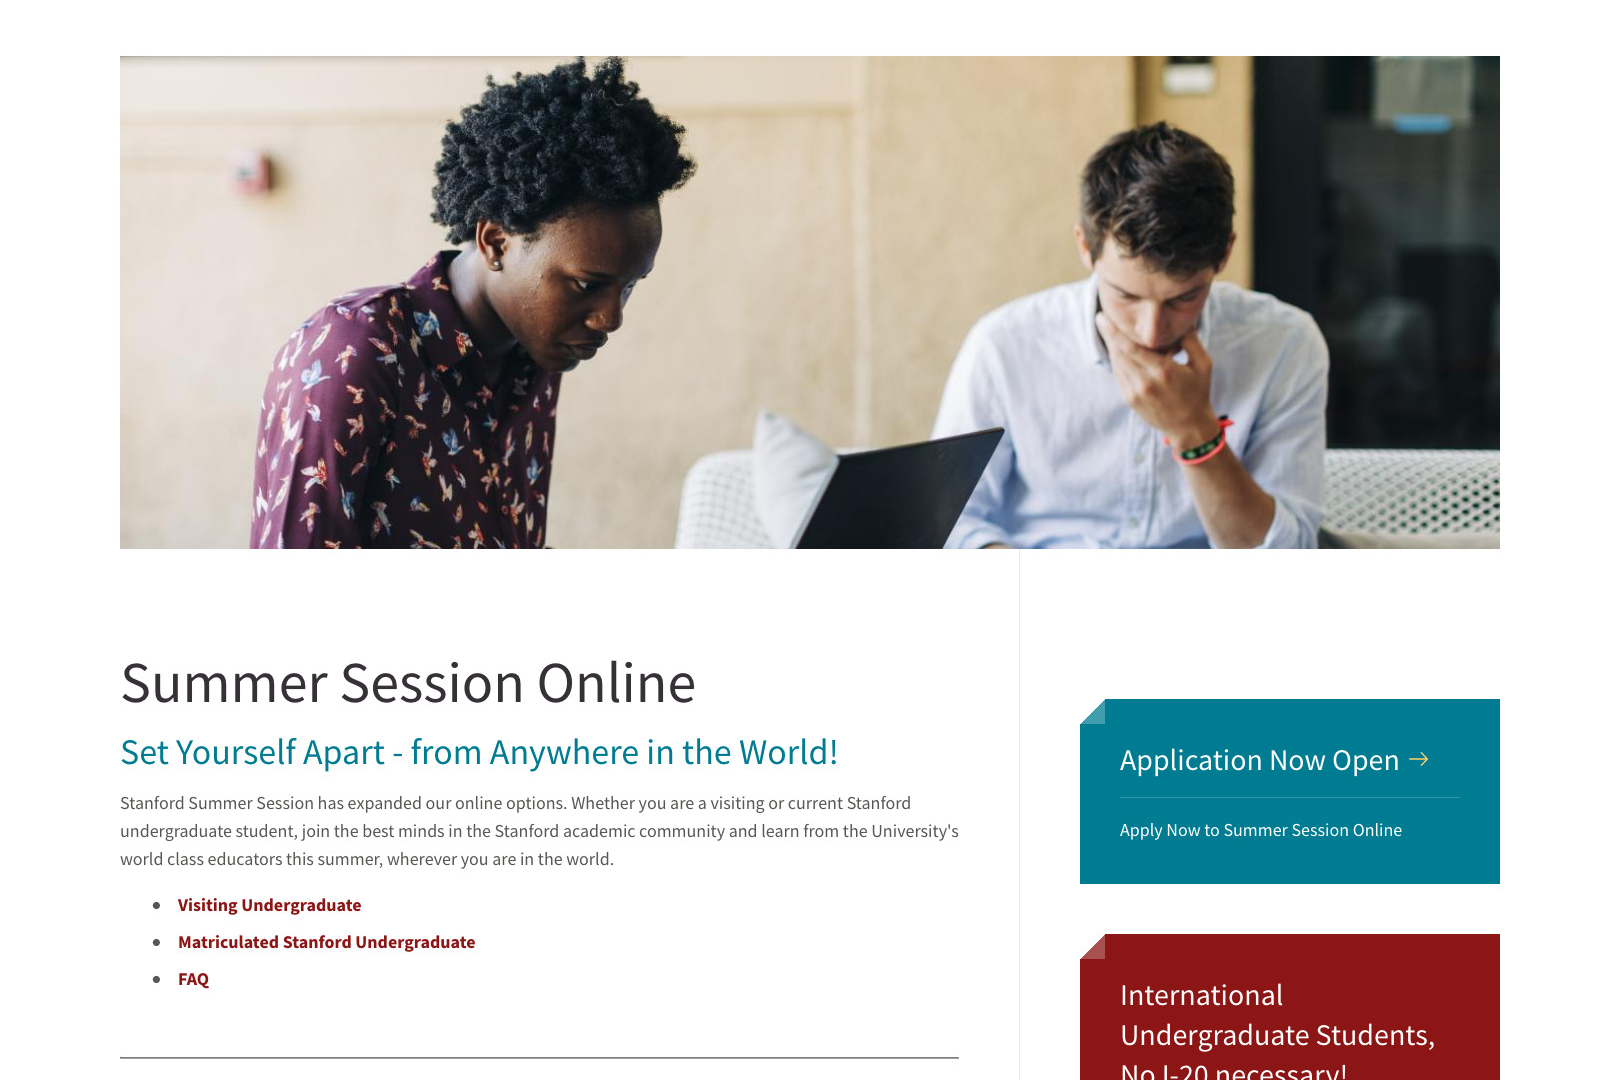 A screenshot of the Stanford Summer Session Online Programs page